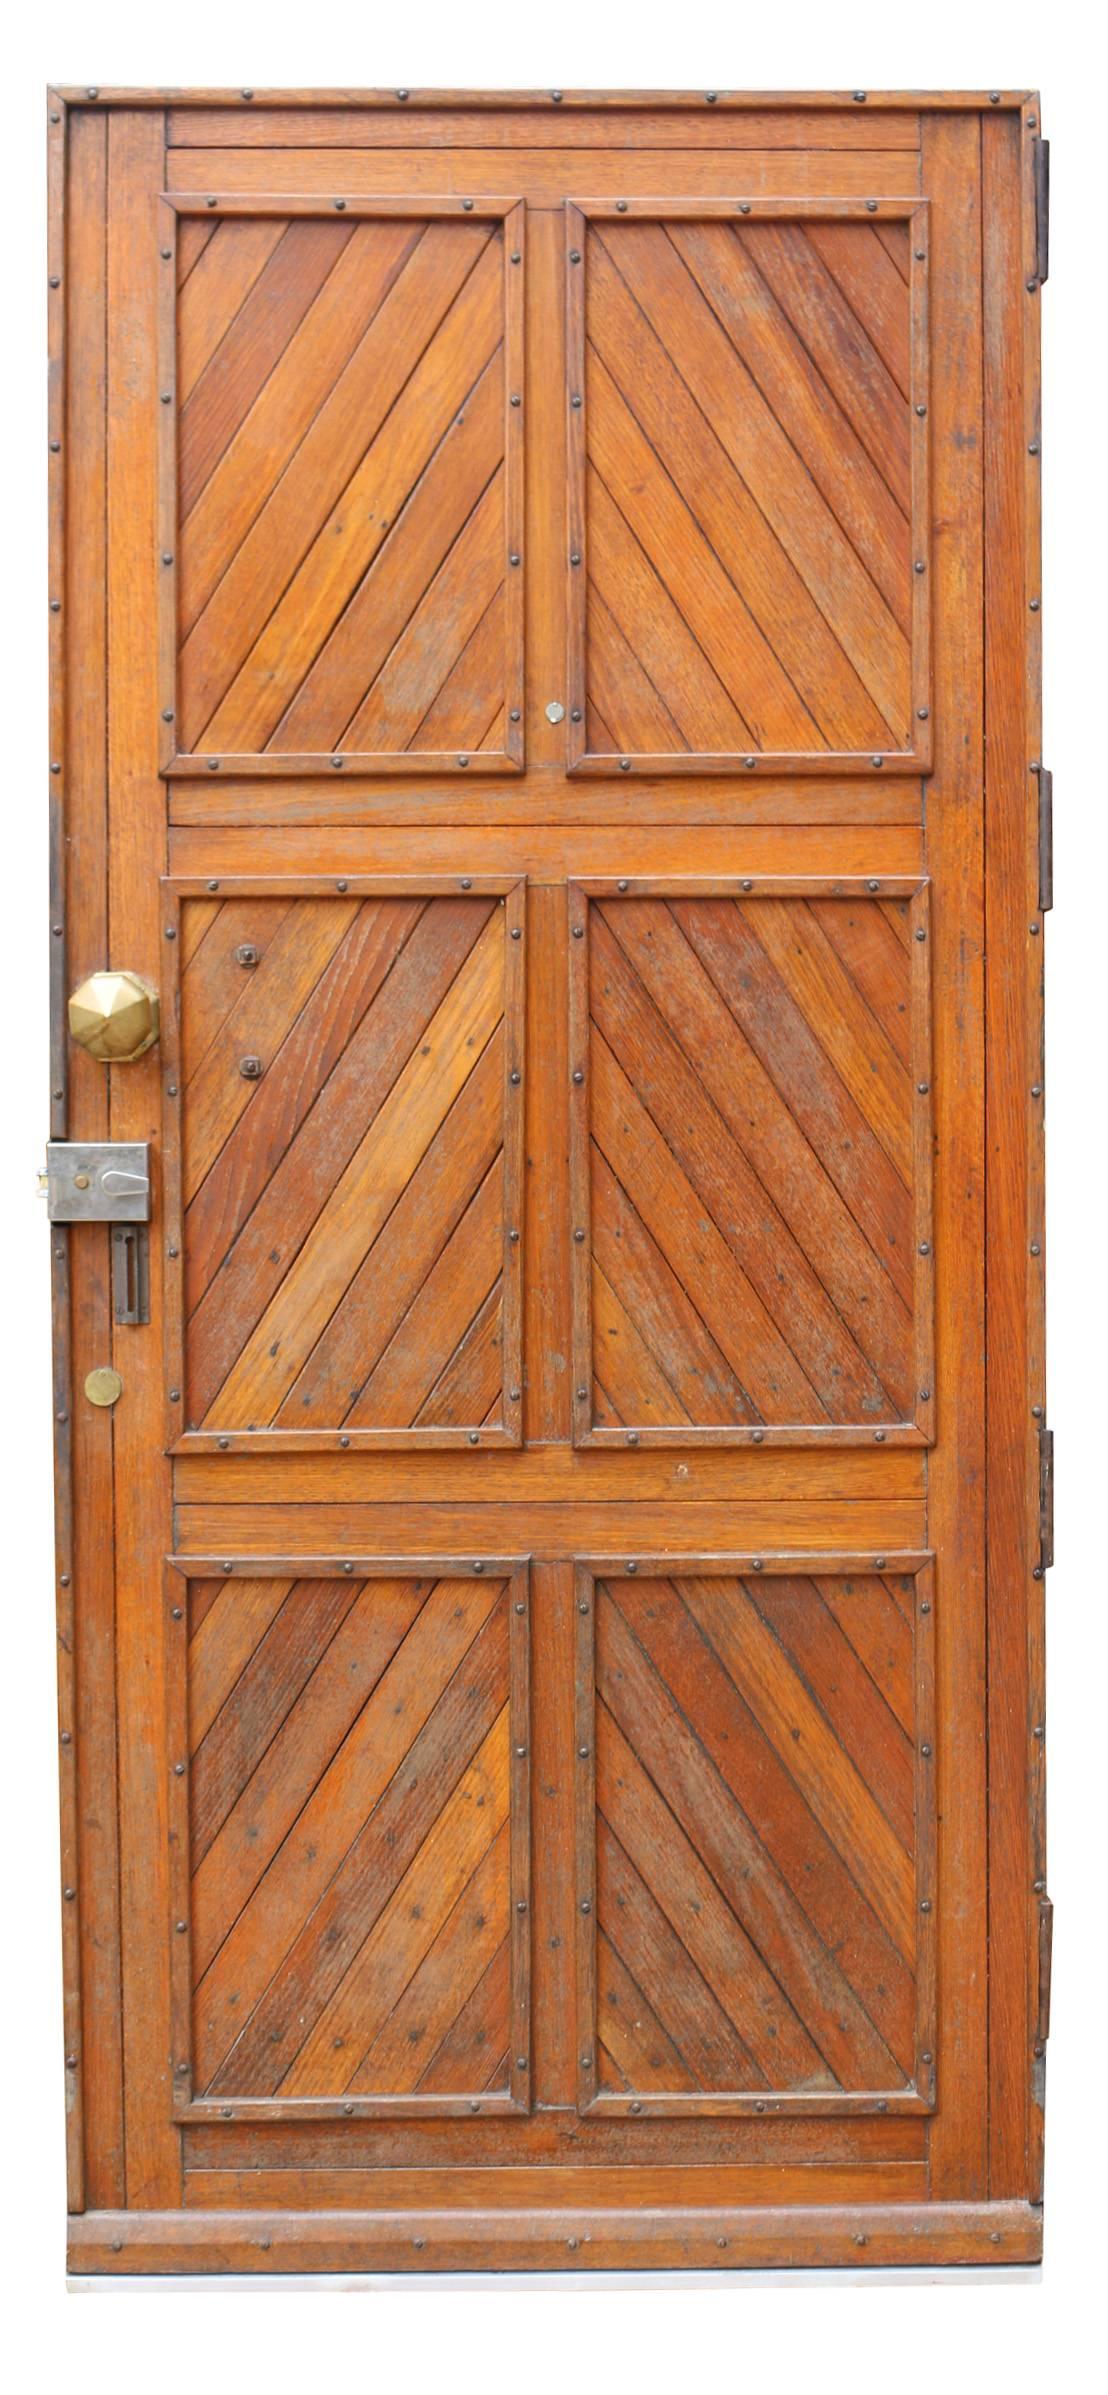 This door includes hinges, a door pull/knocker and would require new locks.
Weight 64 kg.